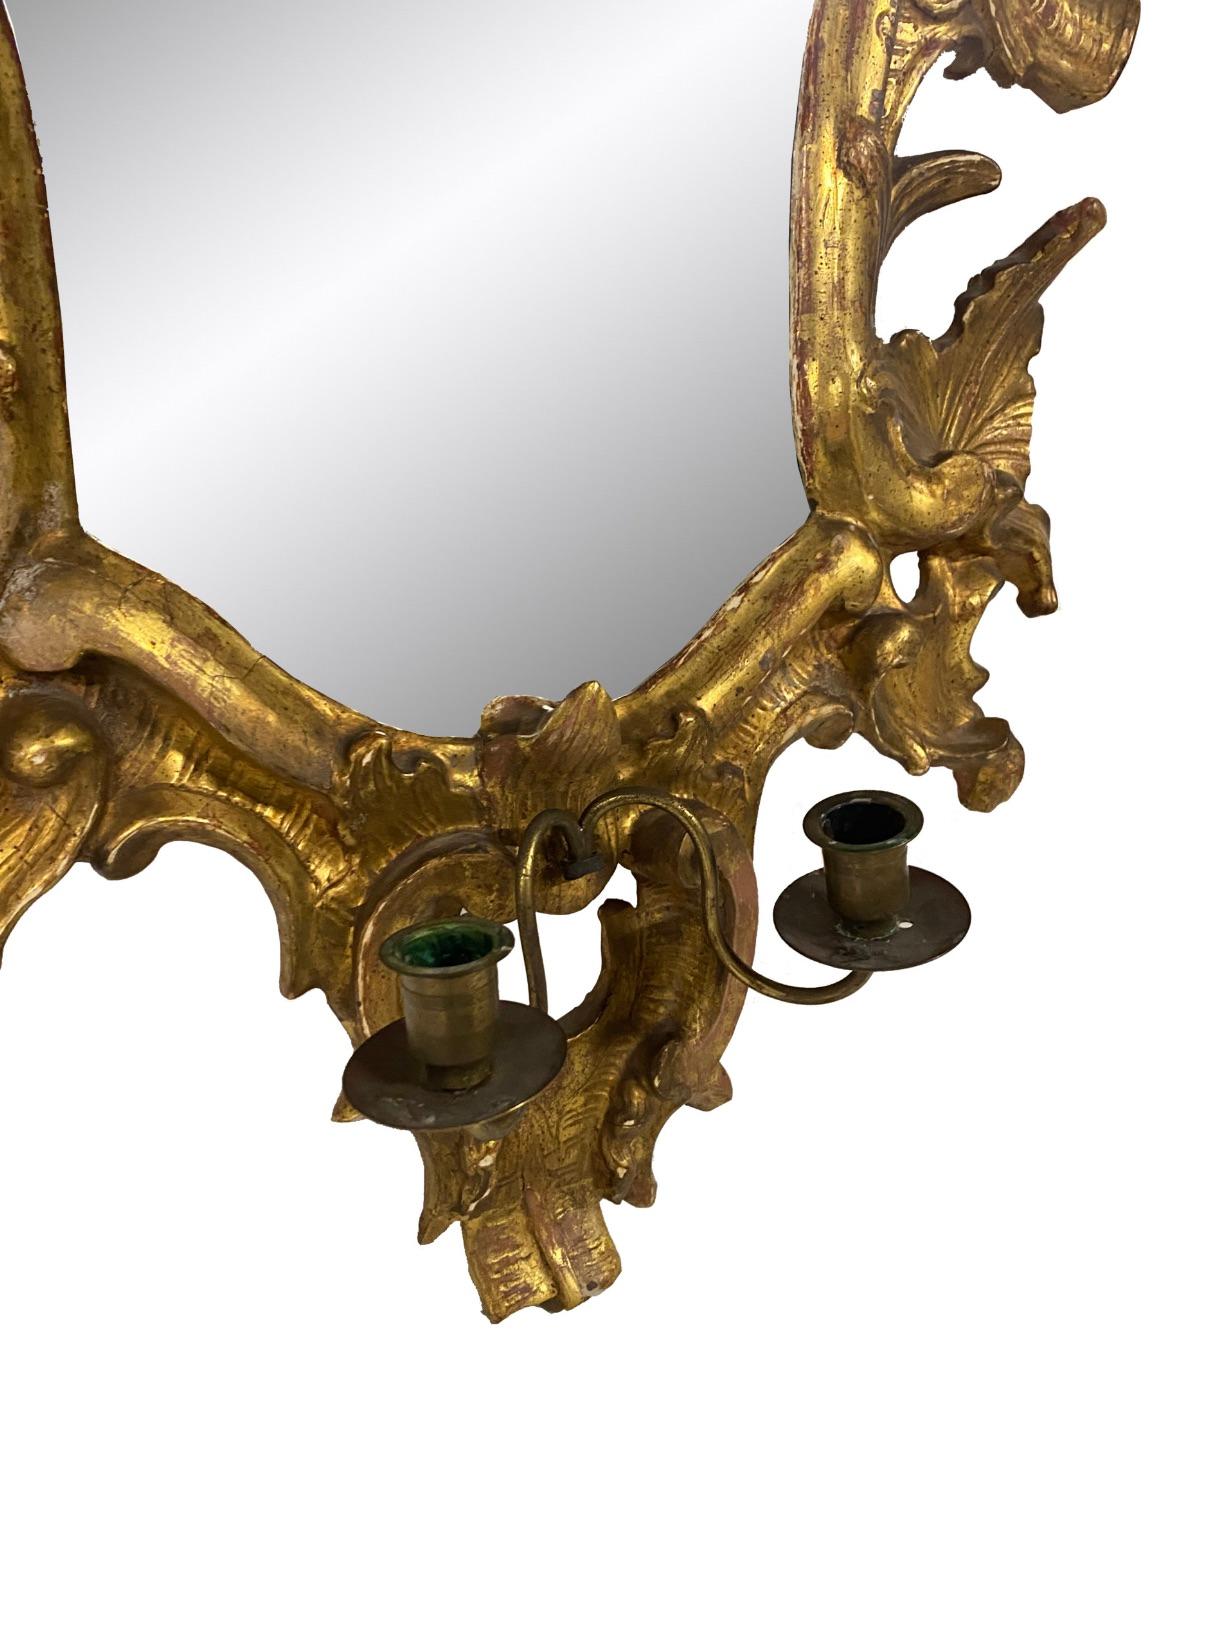 Pair of Italian Rococo Mirrored Gilt Wall Sconces with Candleholders

Need to find candle holder replacement/

Italian Rococo mirrored sconces with candleholders and adorned with carved gilt wood acanthus leaves 

Dimension: 34″H x 23″W x 2.5’D

